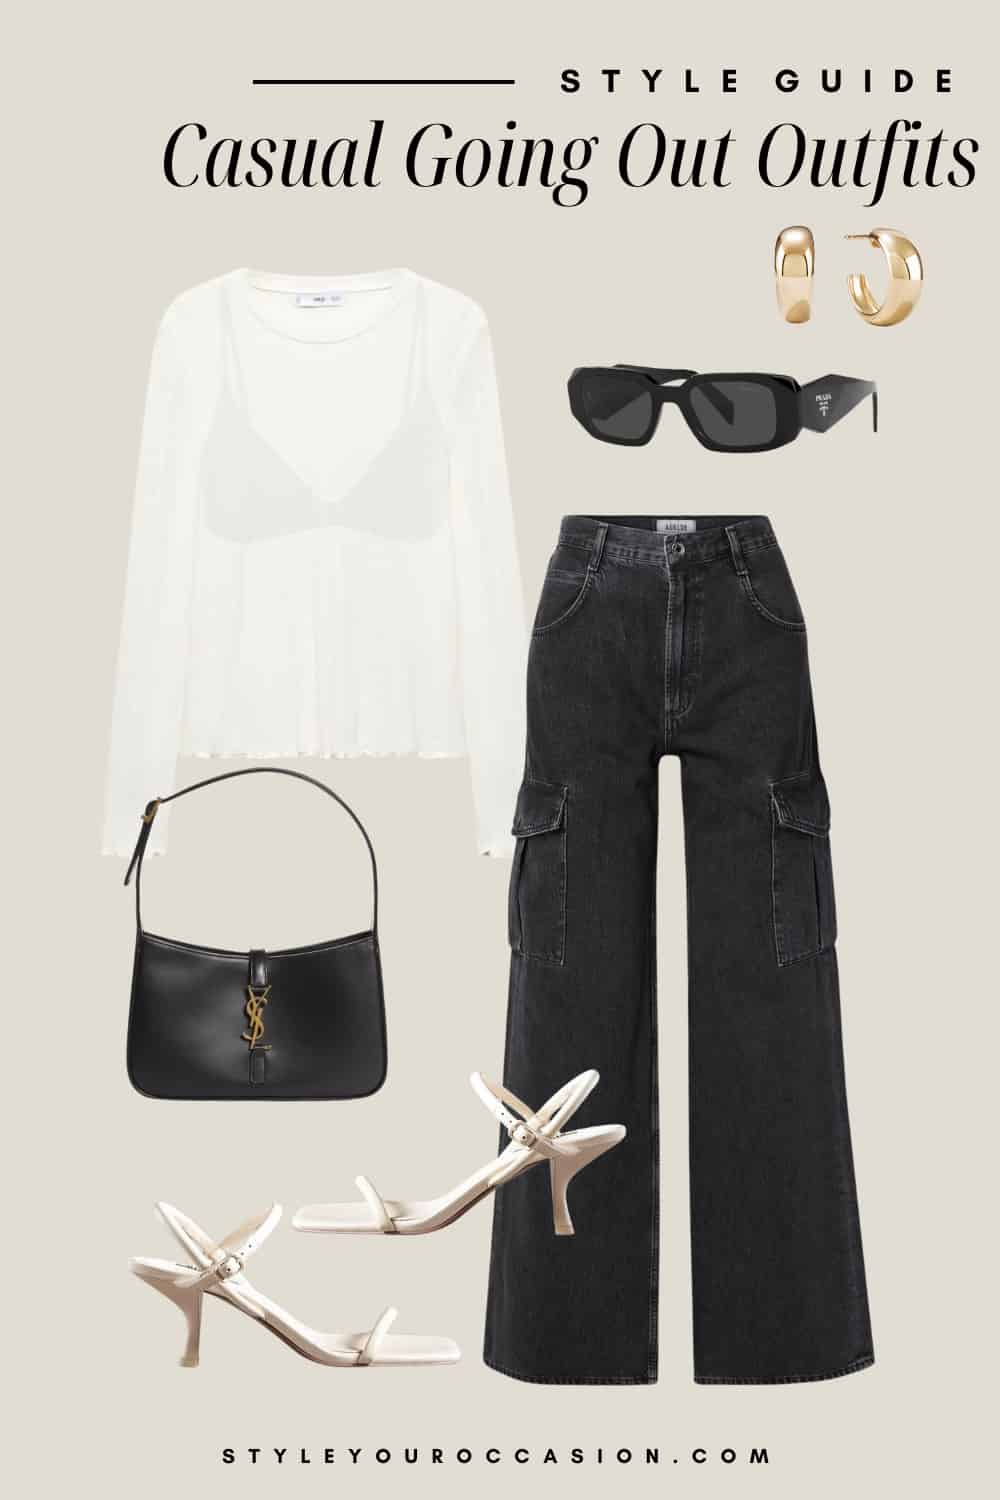 Outfit styling graphic of black wide leg cargo pants, a white sheet top with a bra underneath, white strappy heels and black accessories.